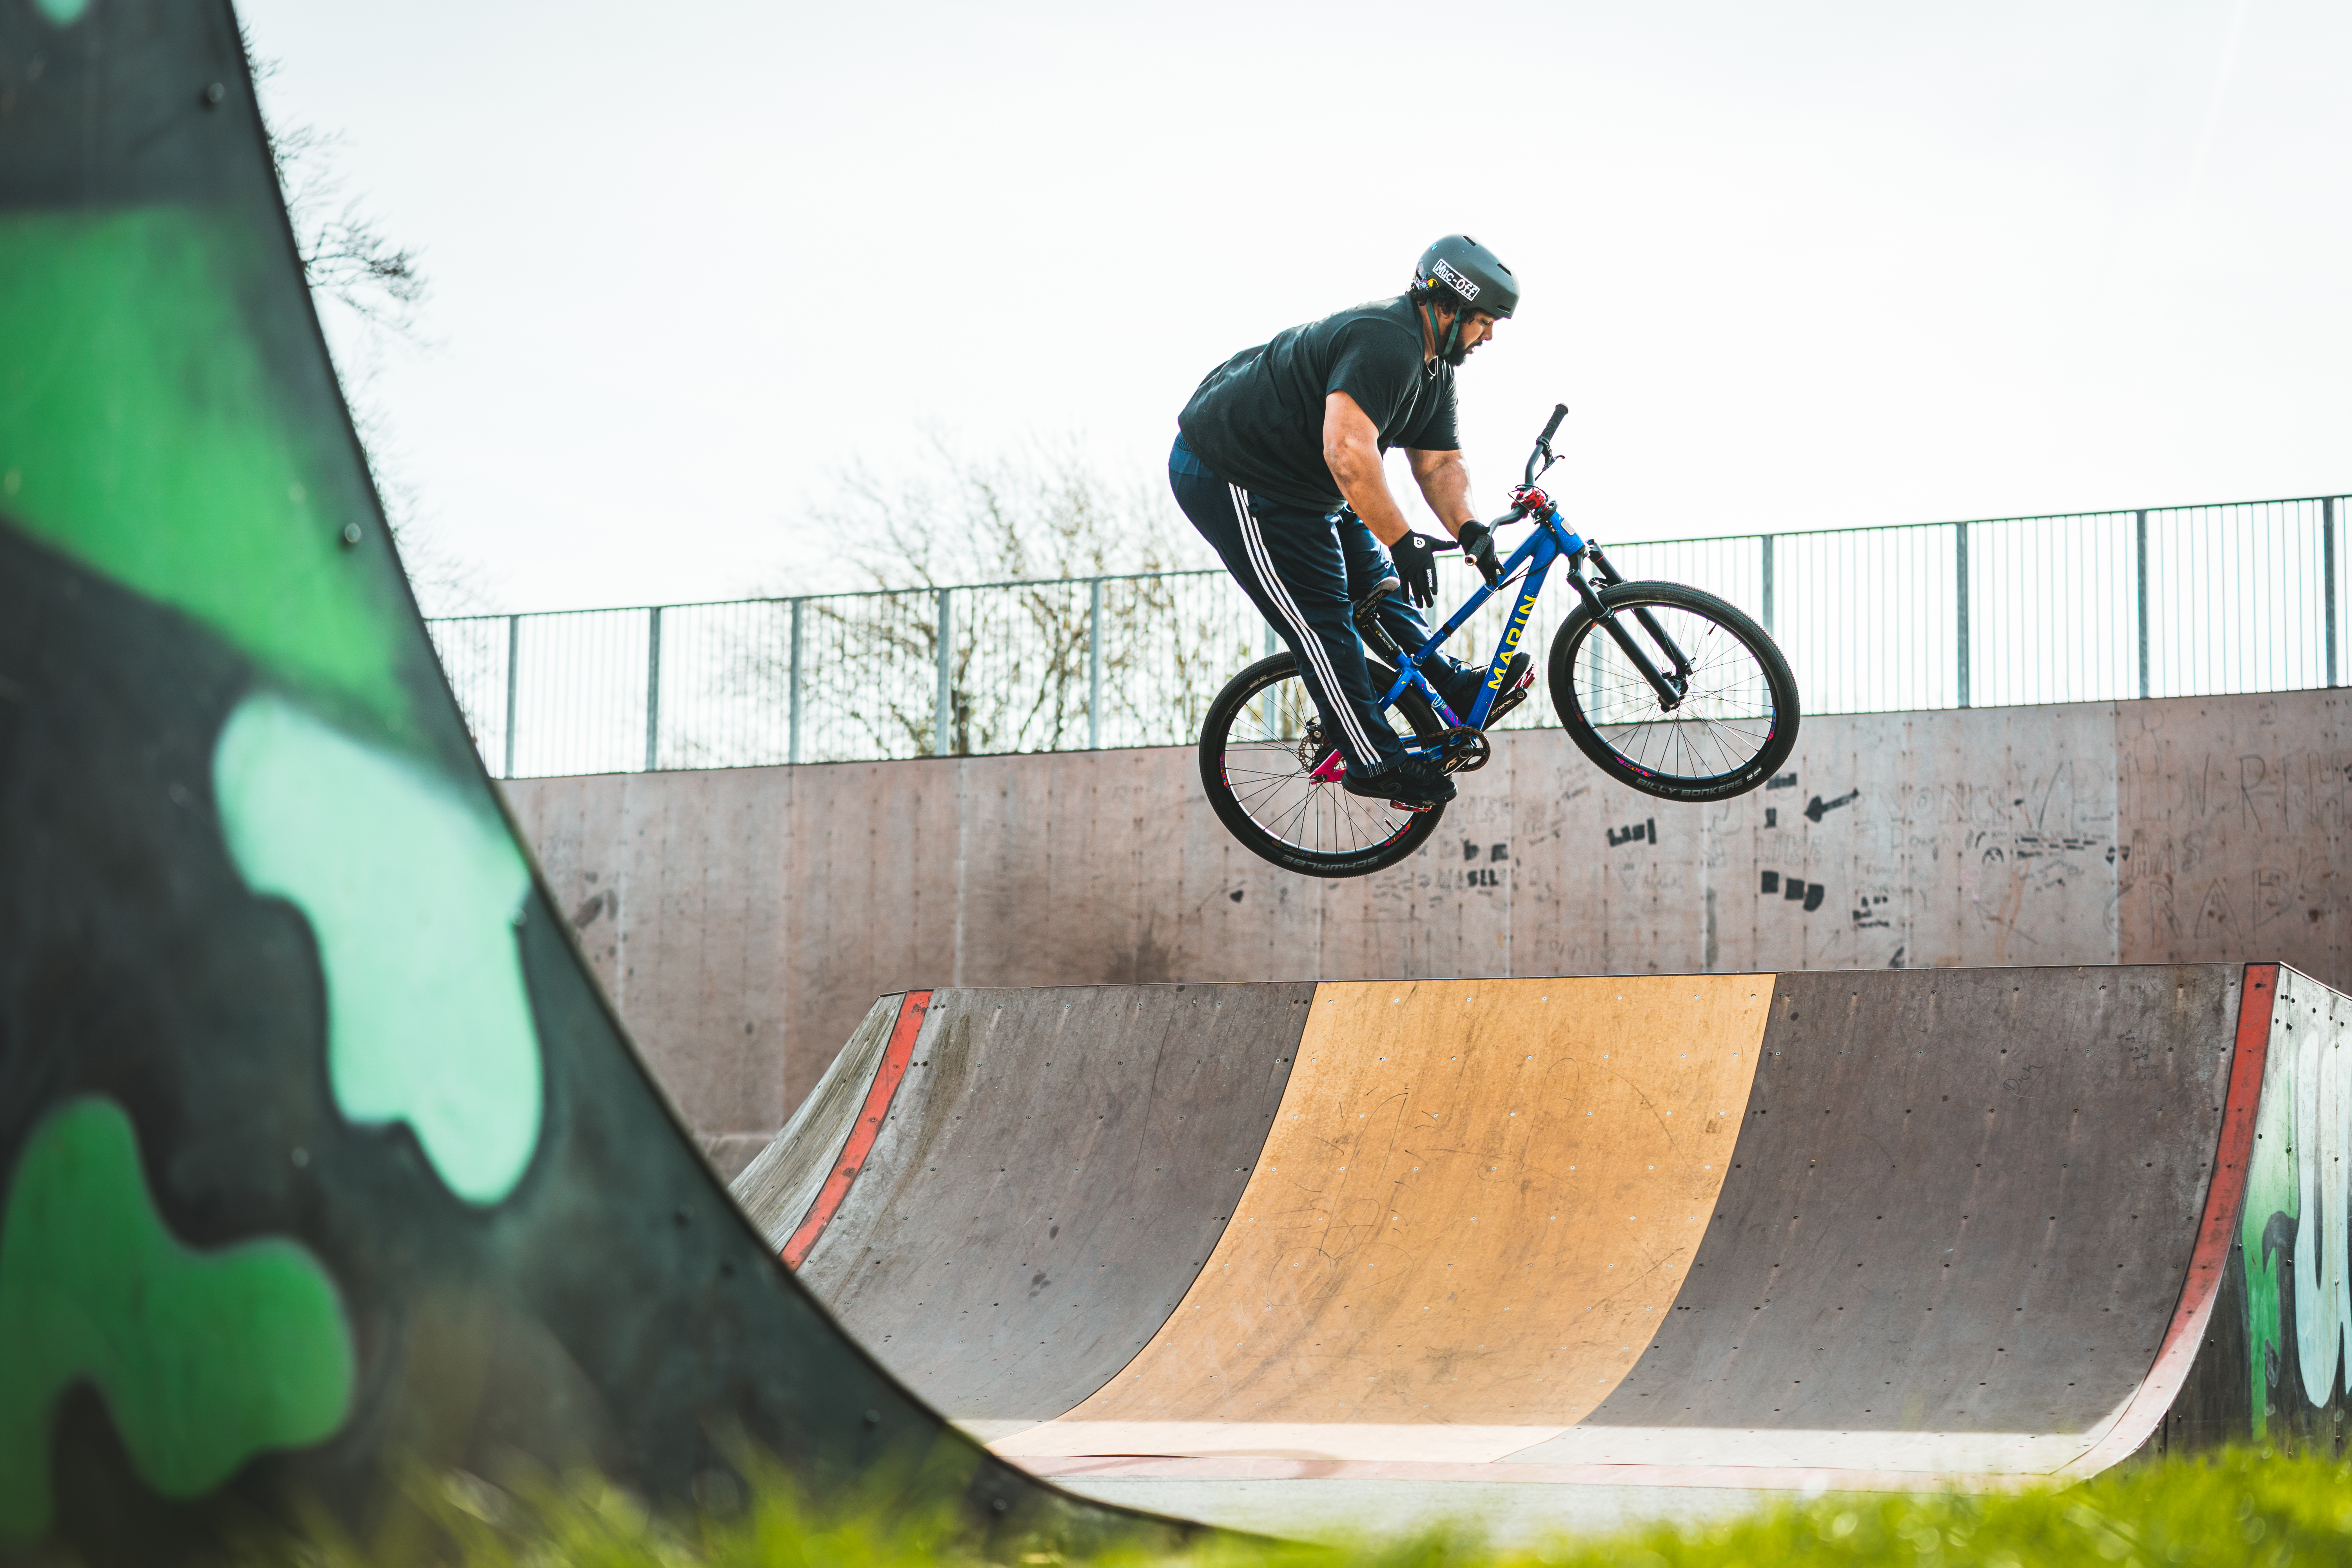 Shimano MTB athlete Leo Smith doing a bar spin while riding his Mountain bike in London